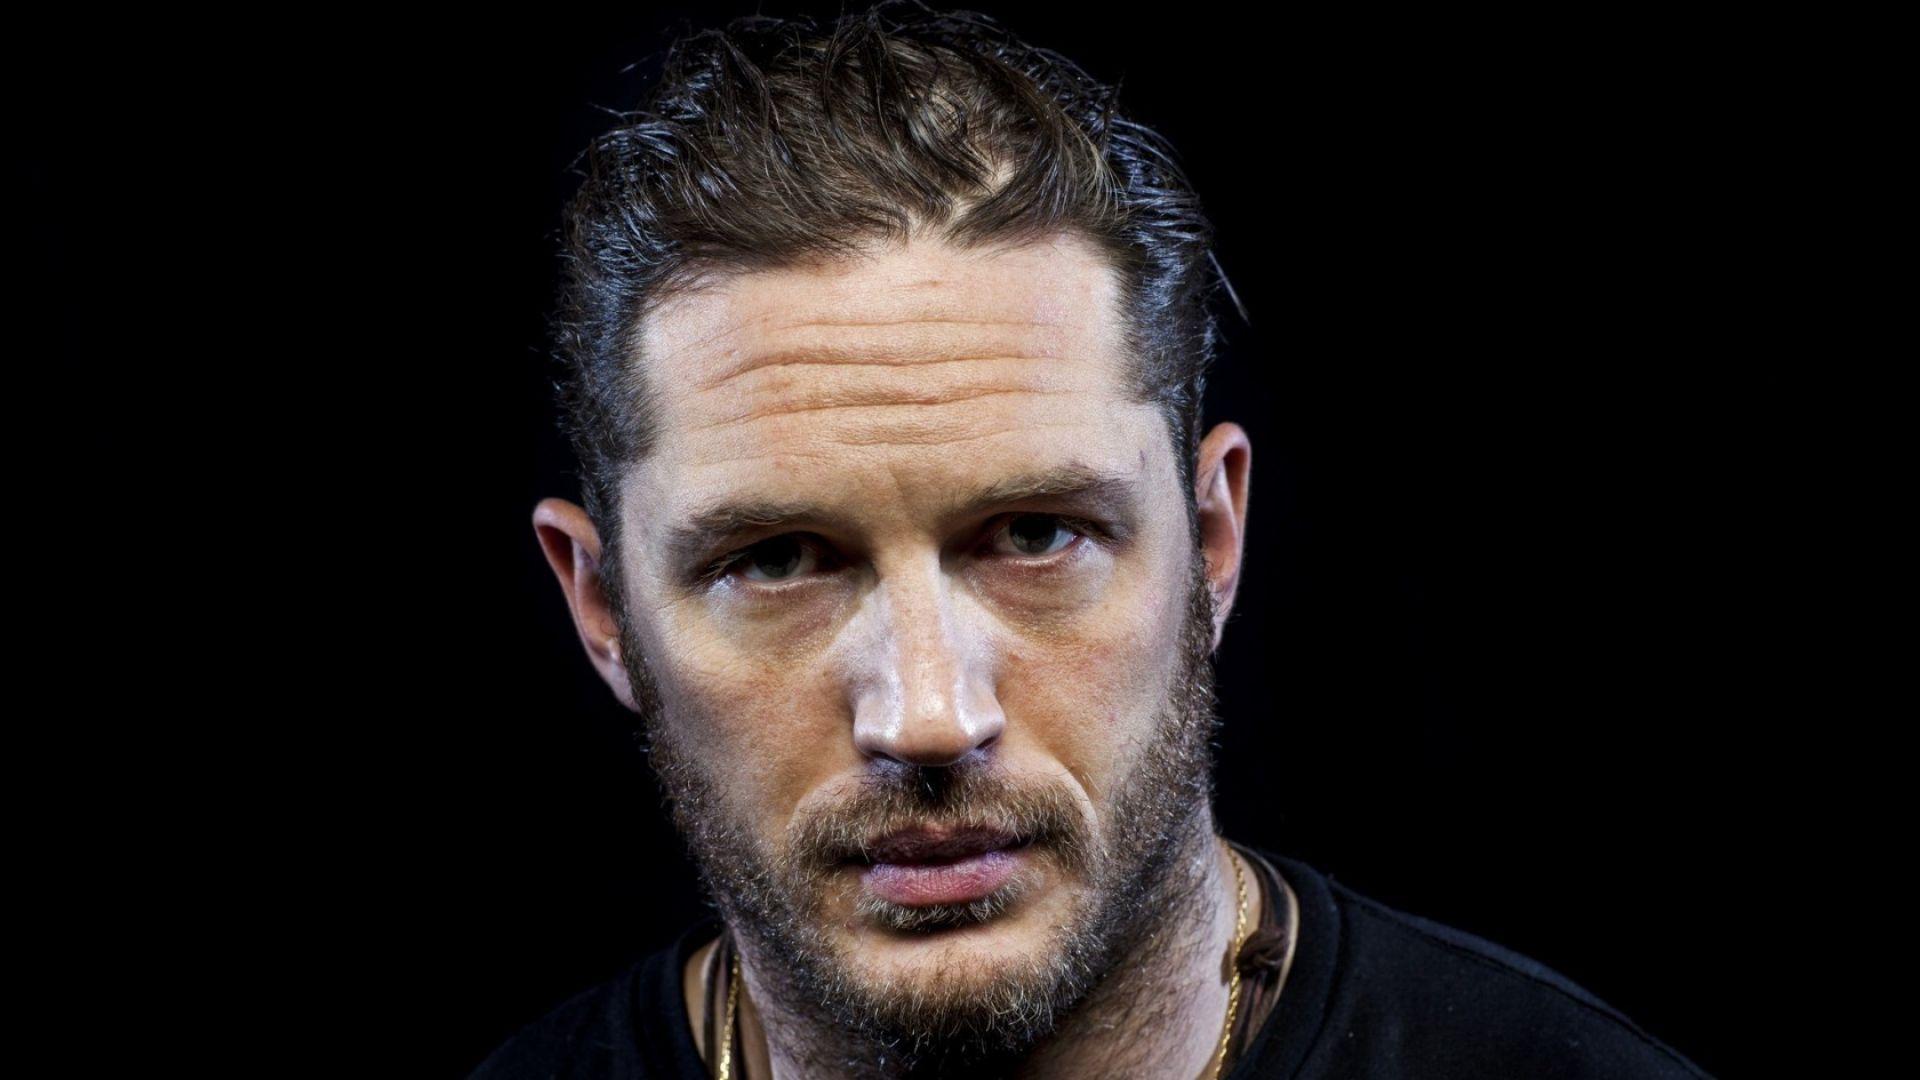 Tom Hardy Face Wallpaper 51406 1920x1080 px